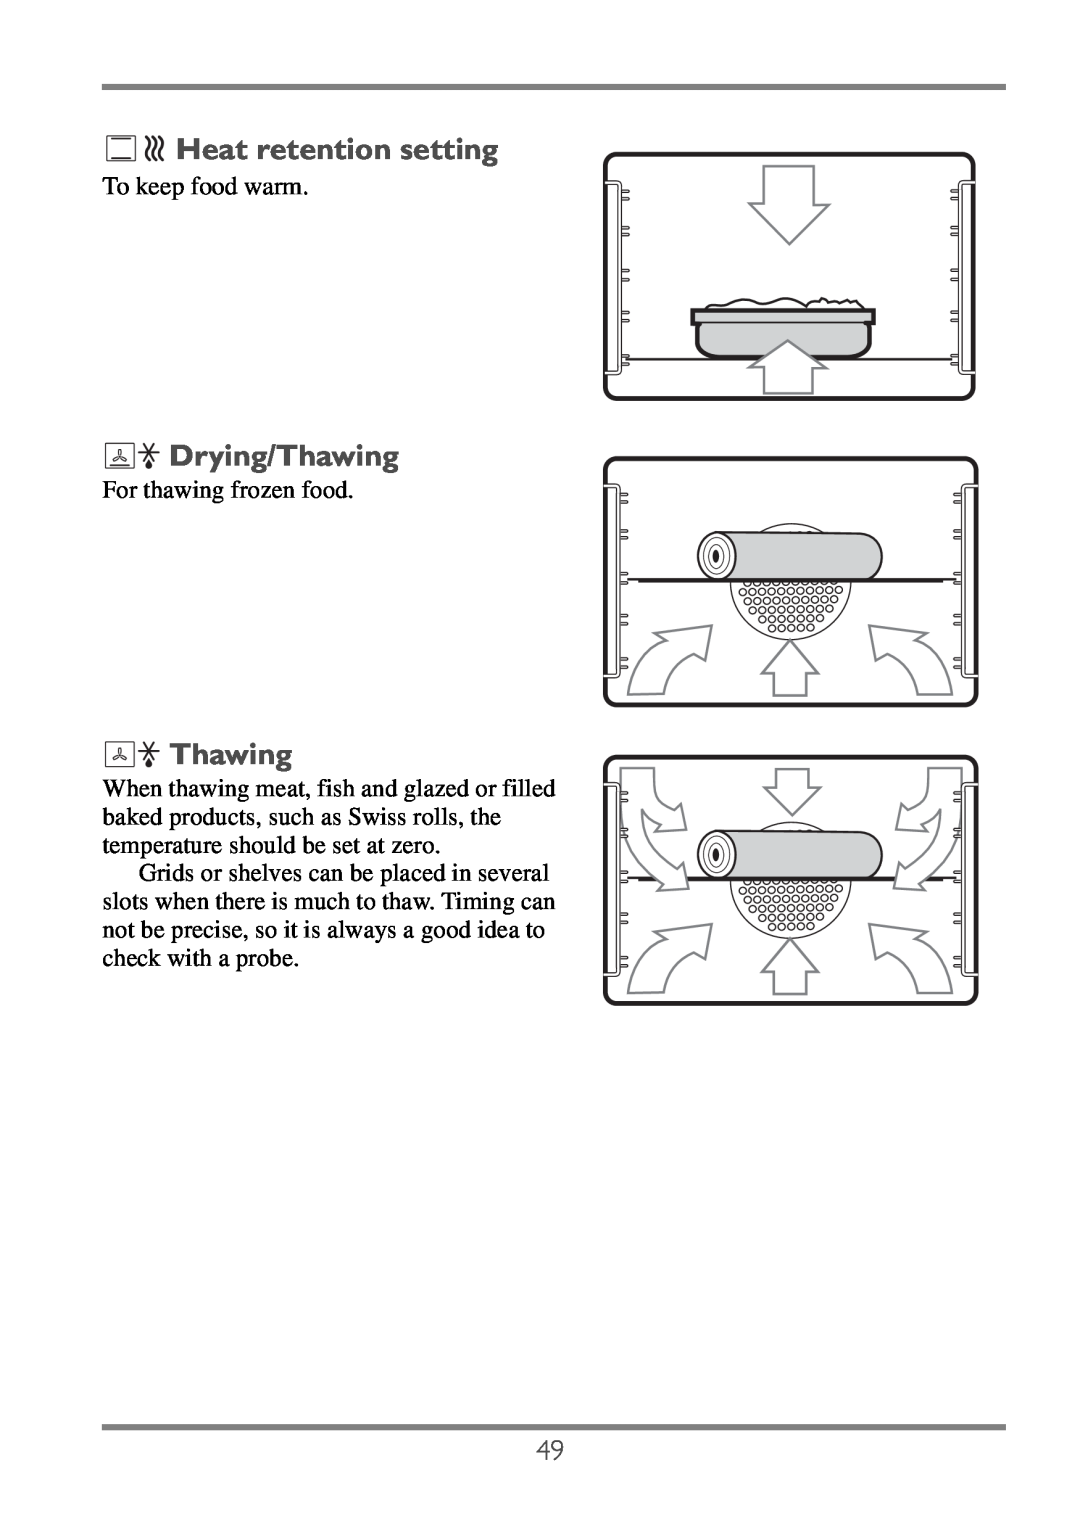 Electrolux EKC60752 user manual Drying/Thawing, Heat retention setting, To keep food warm, For thawing frozen food 